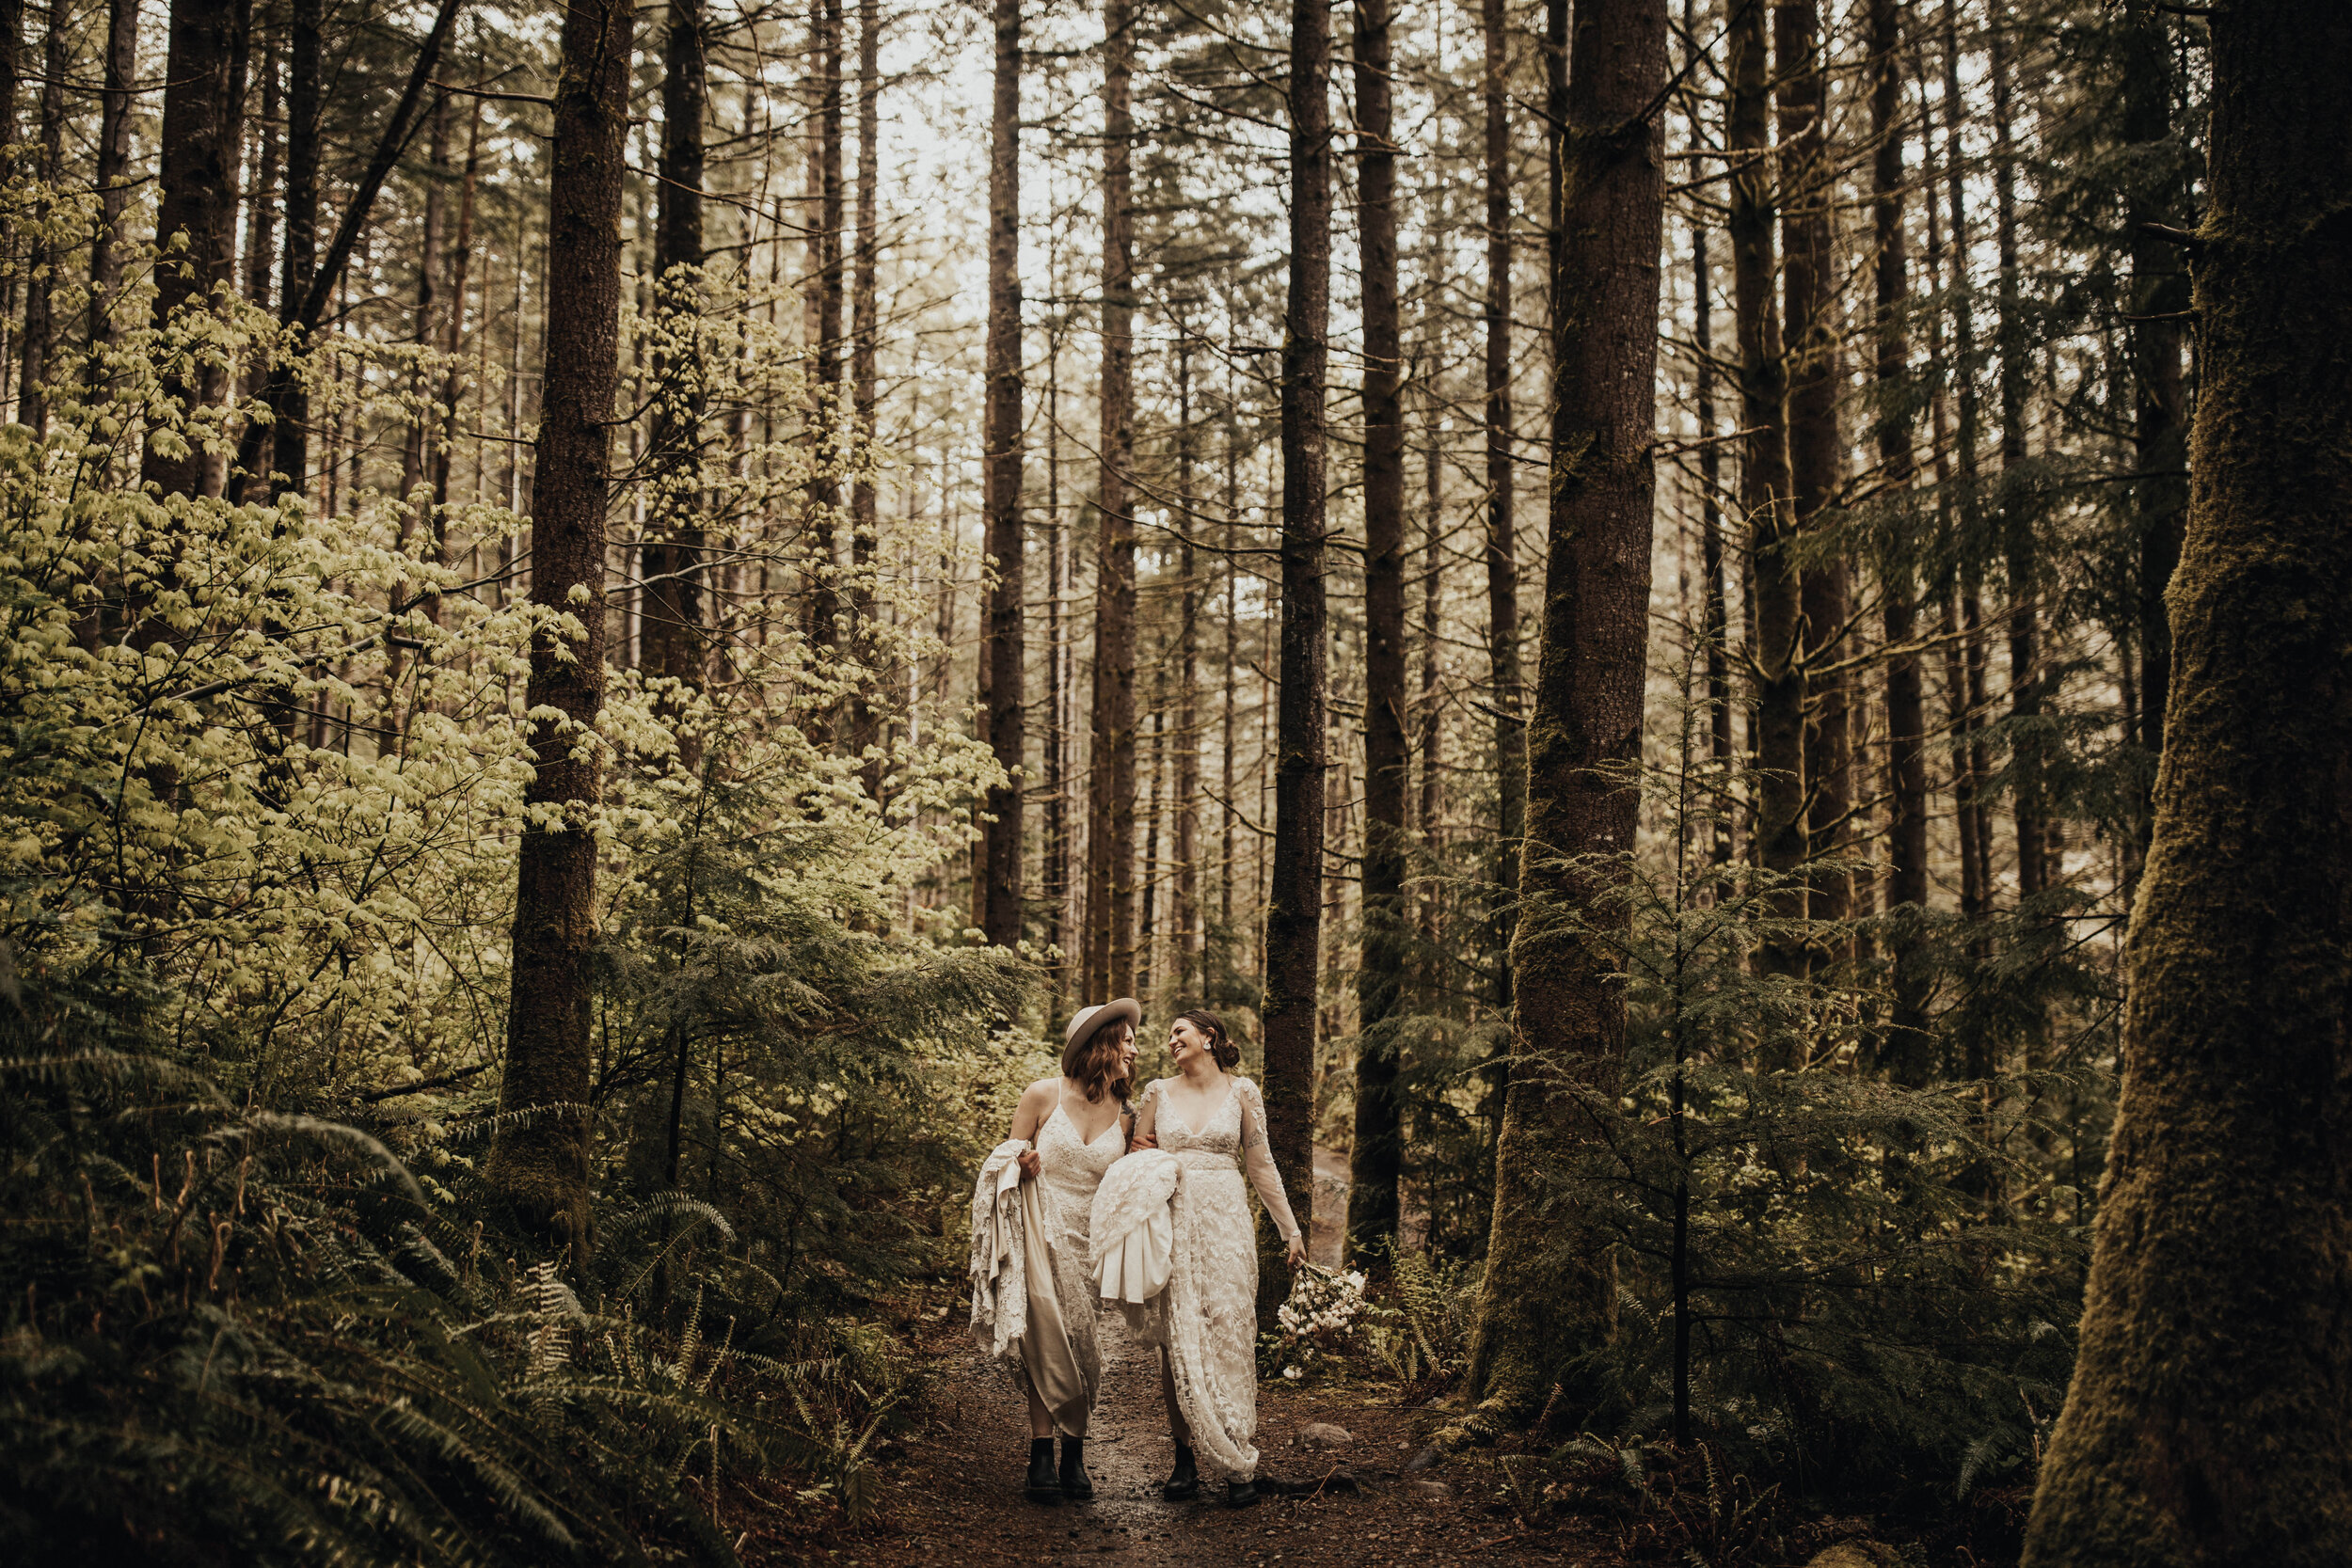  Styled LGBTQIA wedding elopement in Alena Leena Gingko wedding dress in North Bend Oregon photographed by Devoted and Wild 